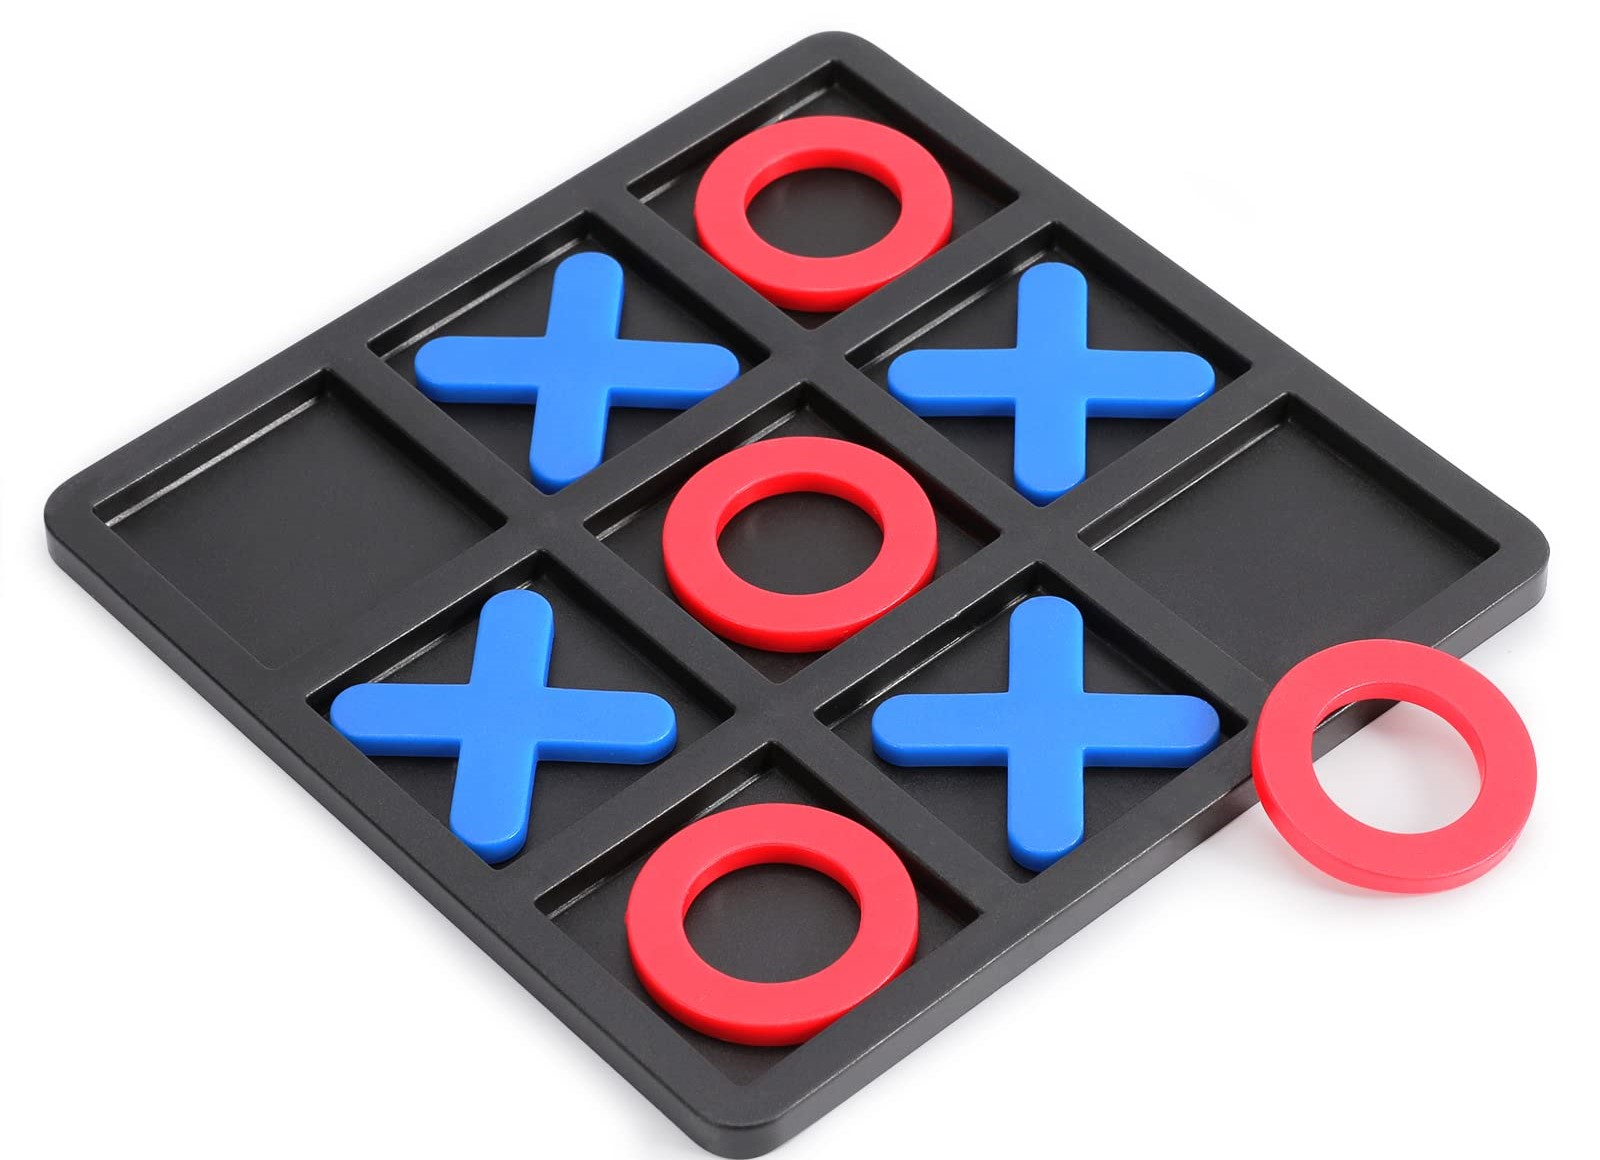 Tic-Tac-Toe Game With Soccer Balls Instead of Circles and Crosses